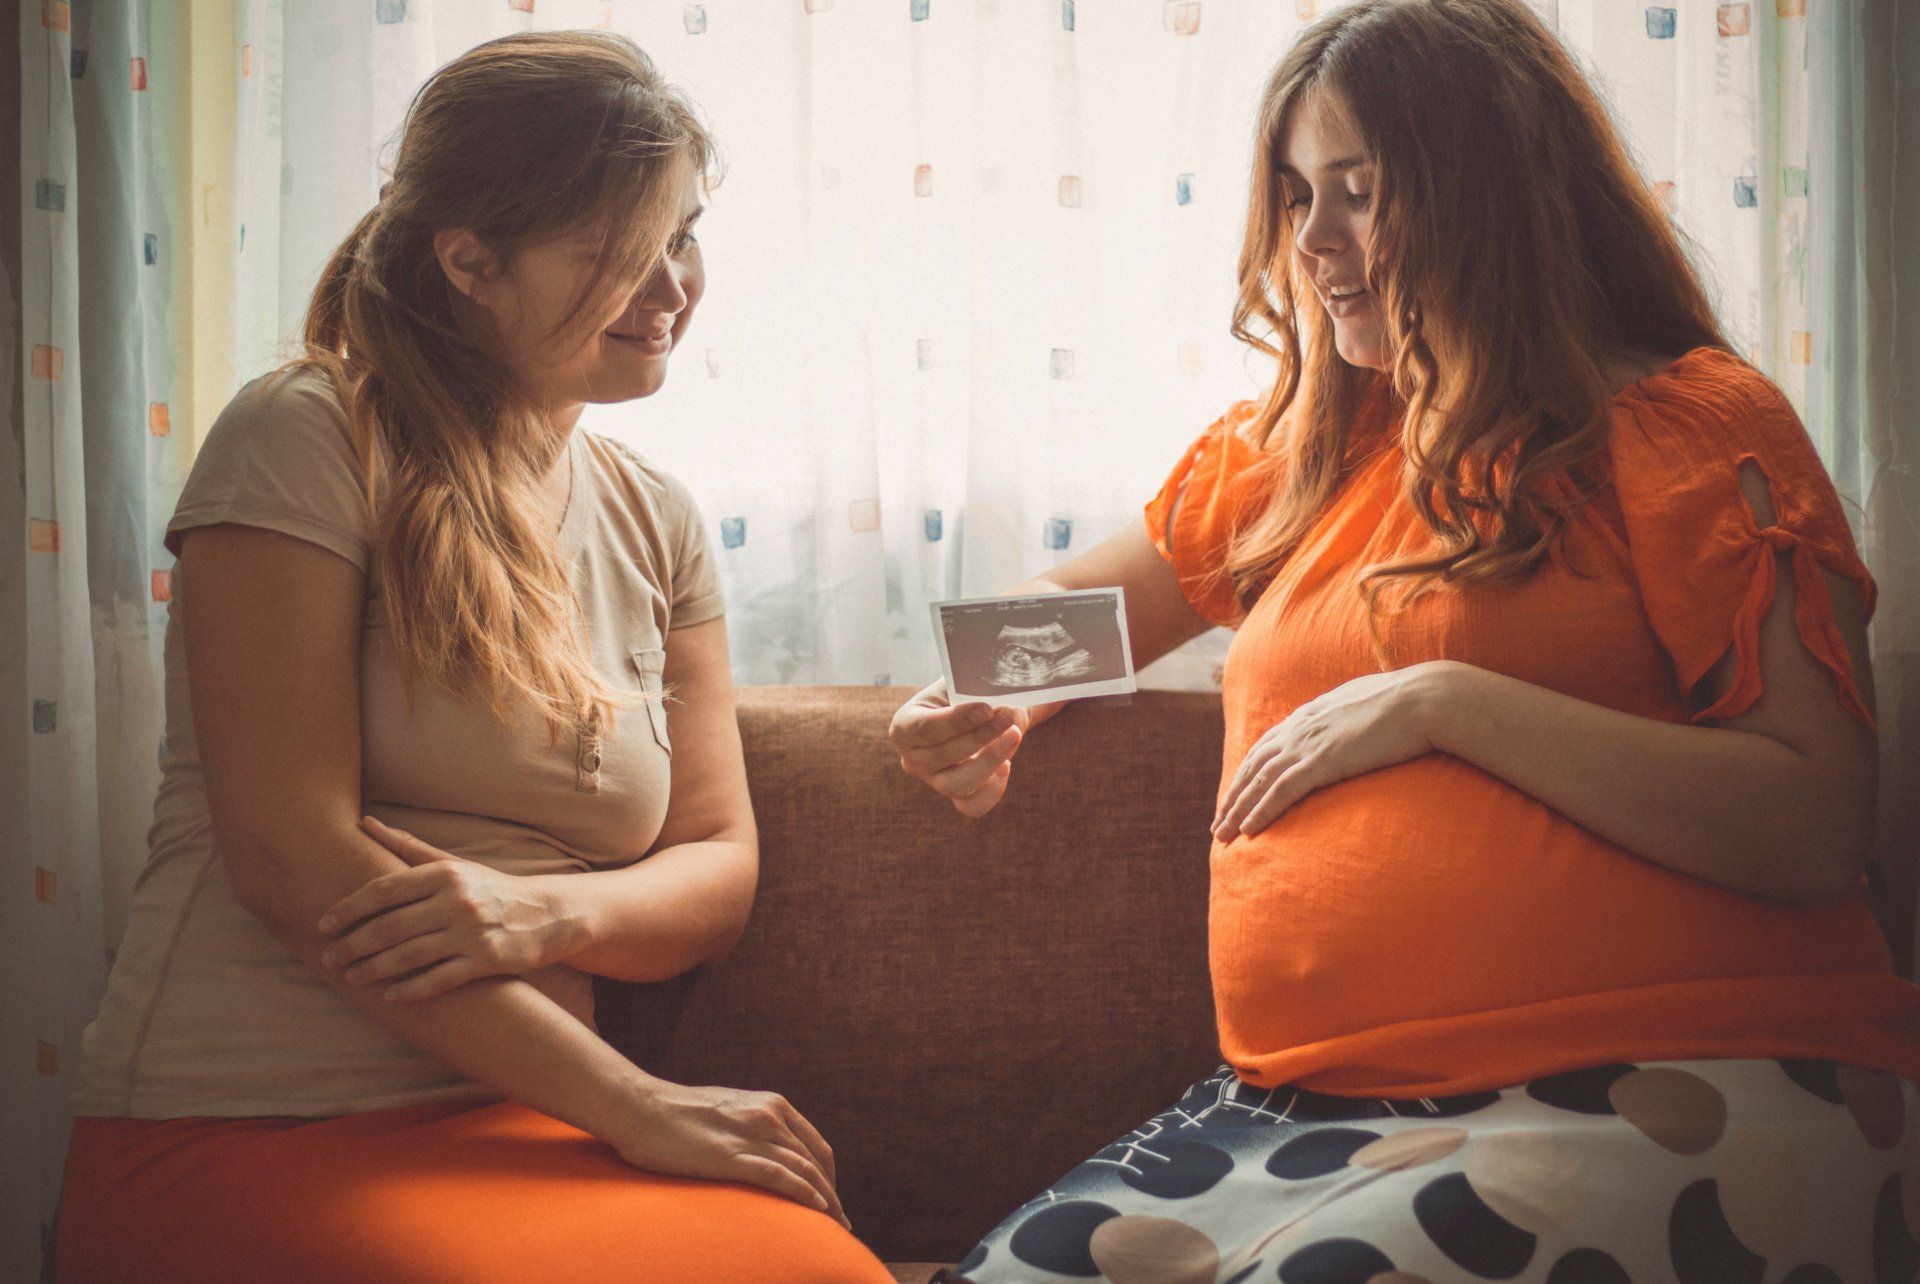 How Do I Help When My Friend Is Pregnant